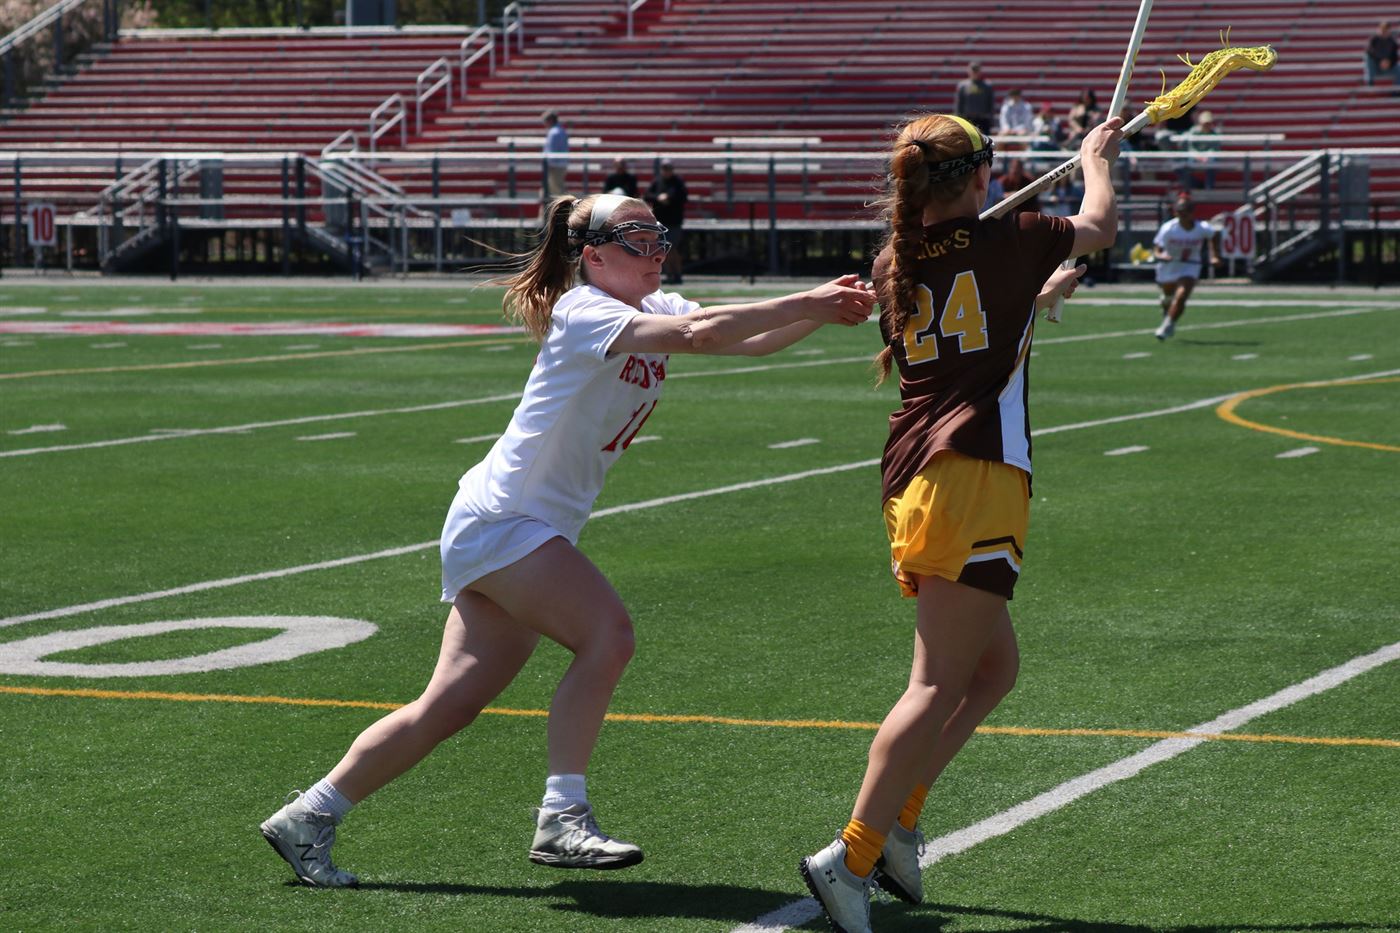 Rhiannon Brown (pictured) noticed the absence of senior midfielder Amber Gonzalez while playing the second half of the season. Trevor Giesberg | The Montclarion